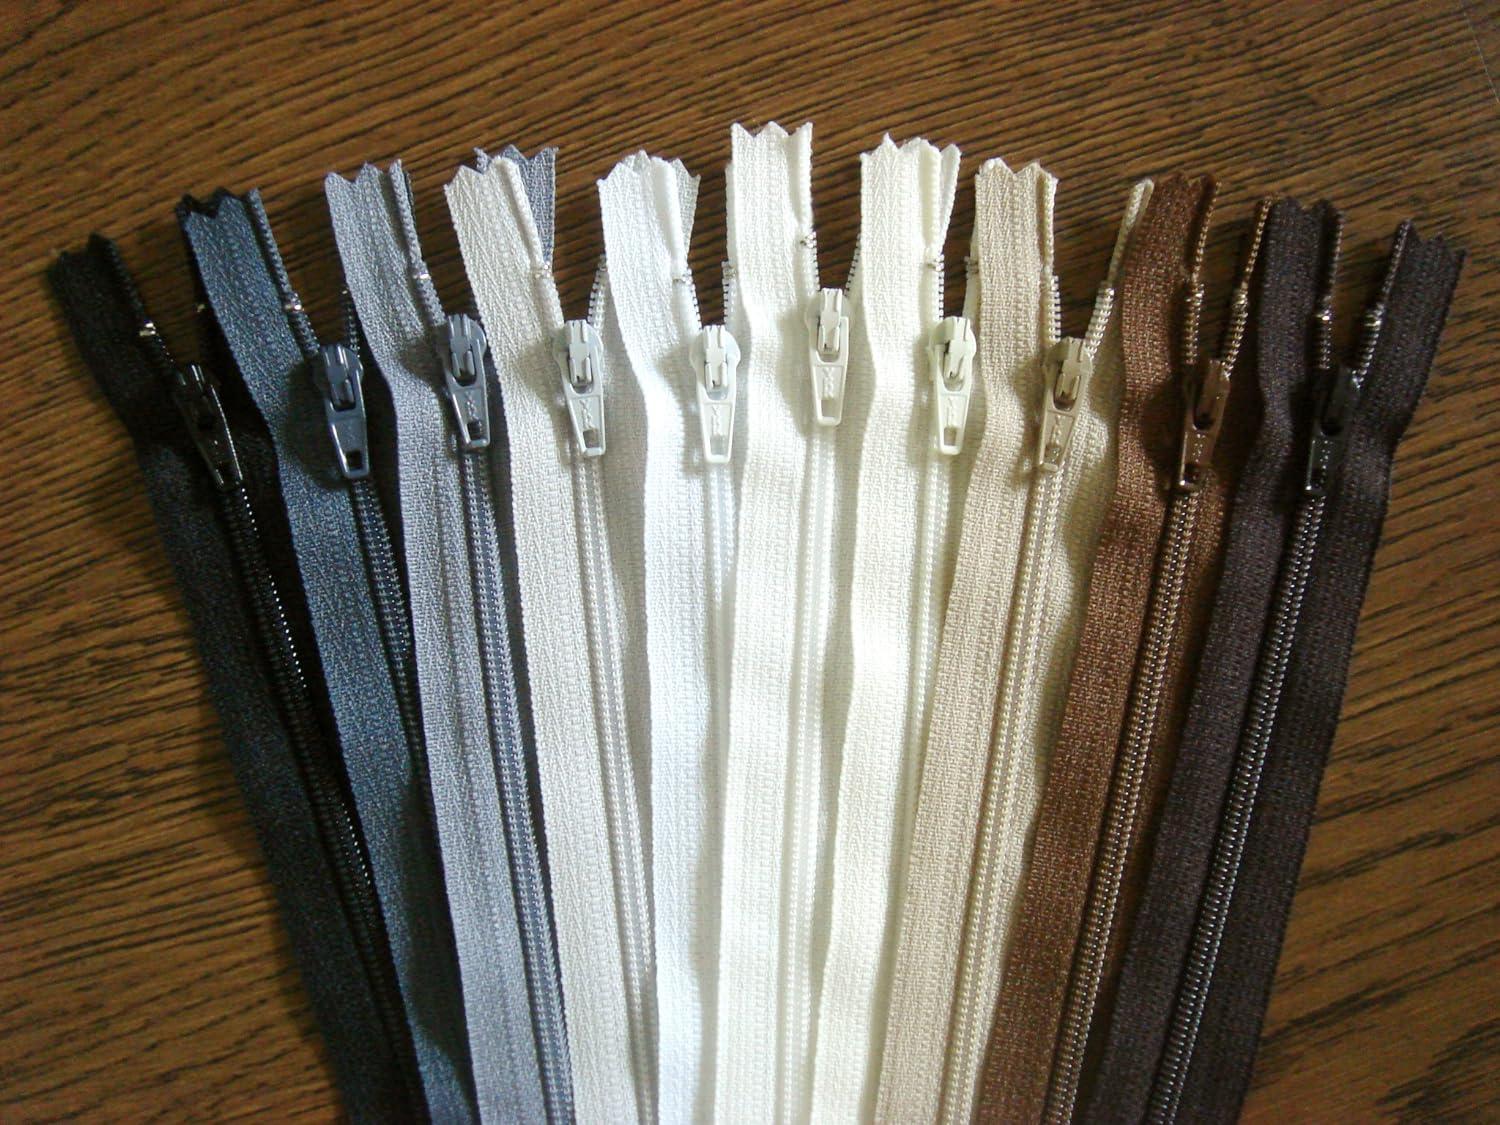 YKK Zippers Assorted Neutral Colors Pack 14 Inch Number 3 Nylon